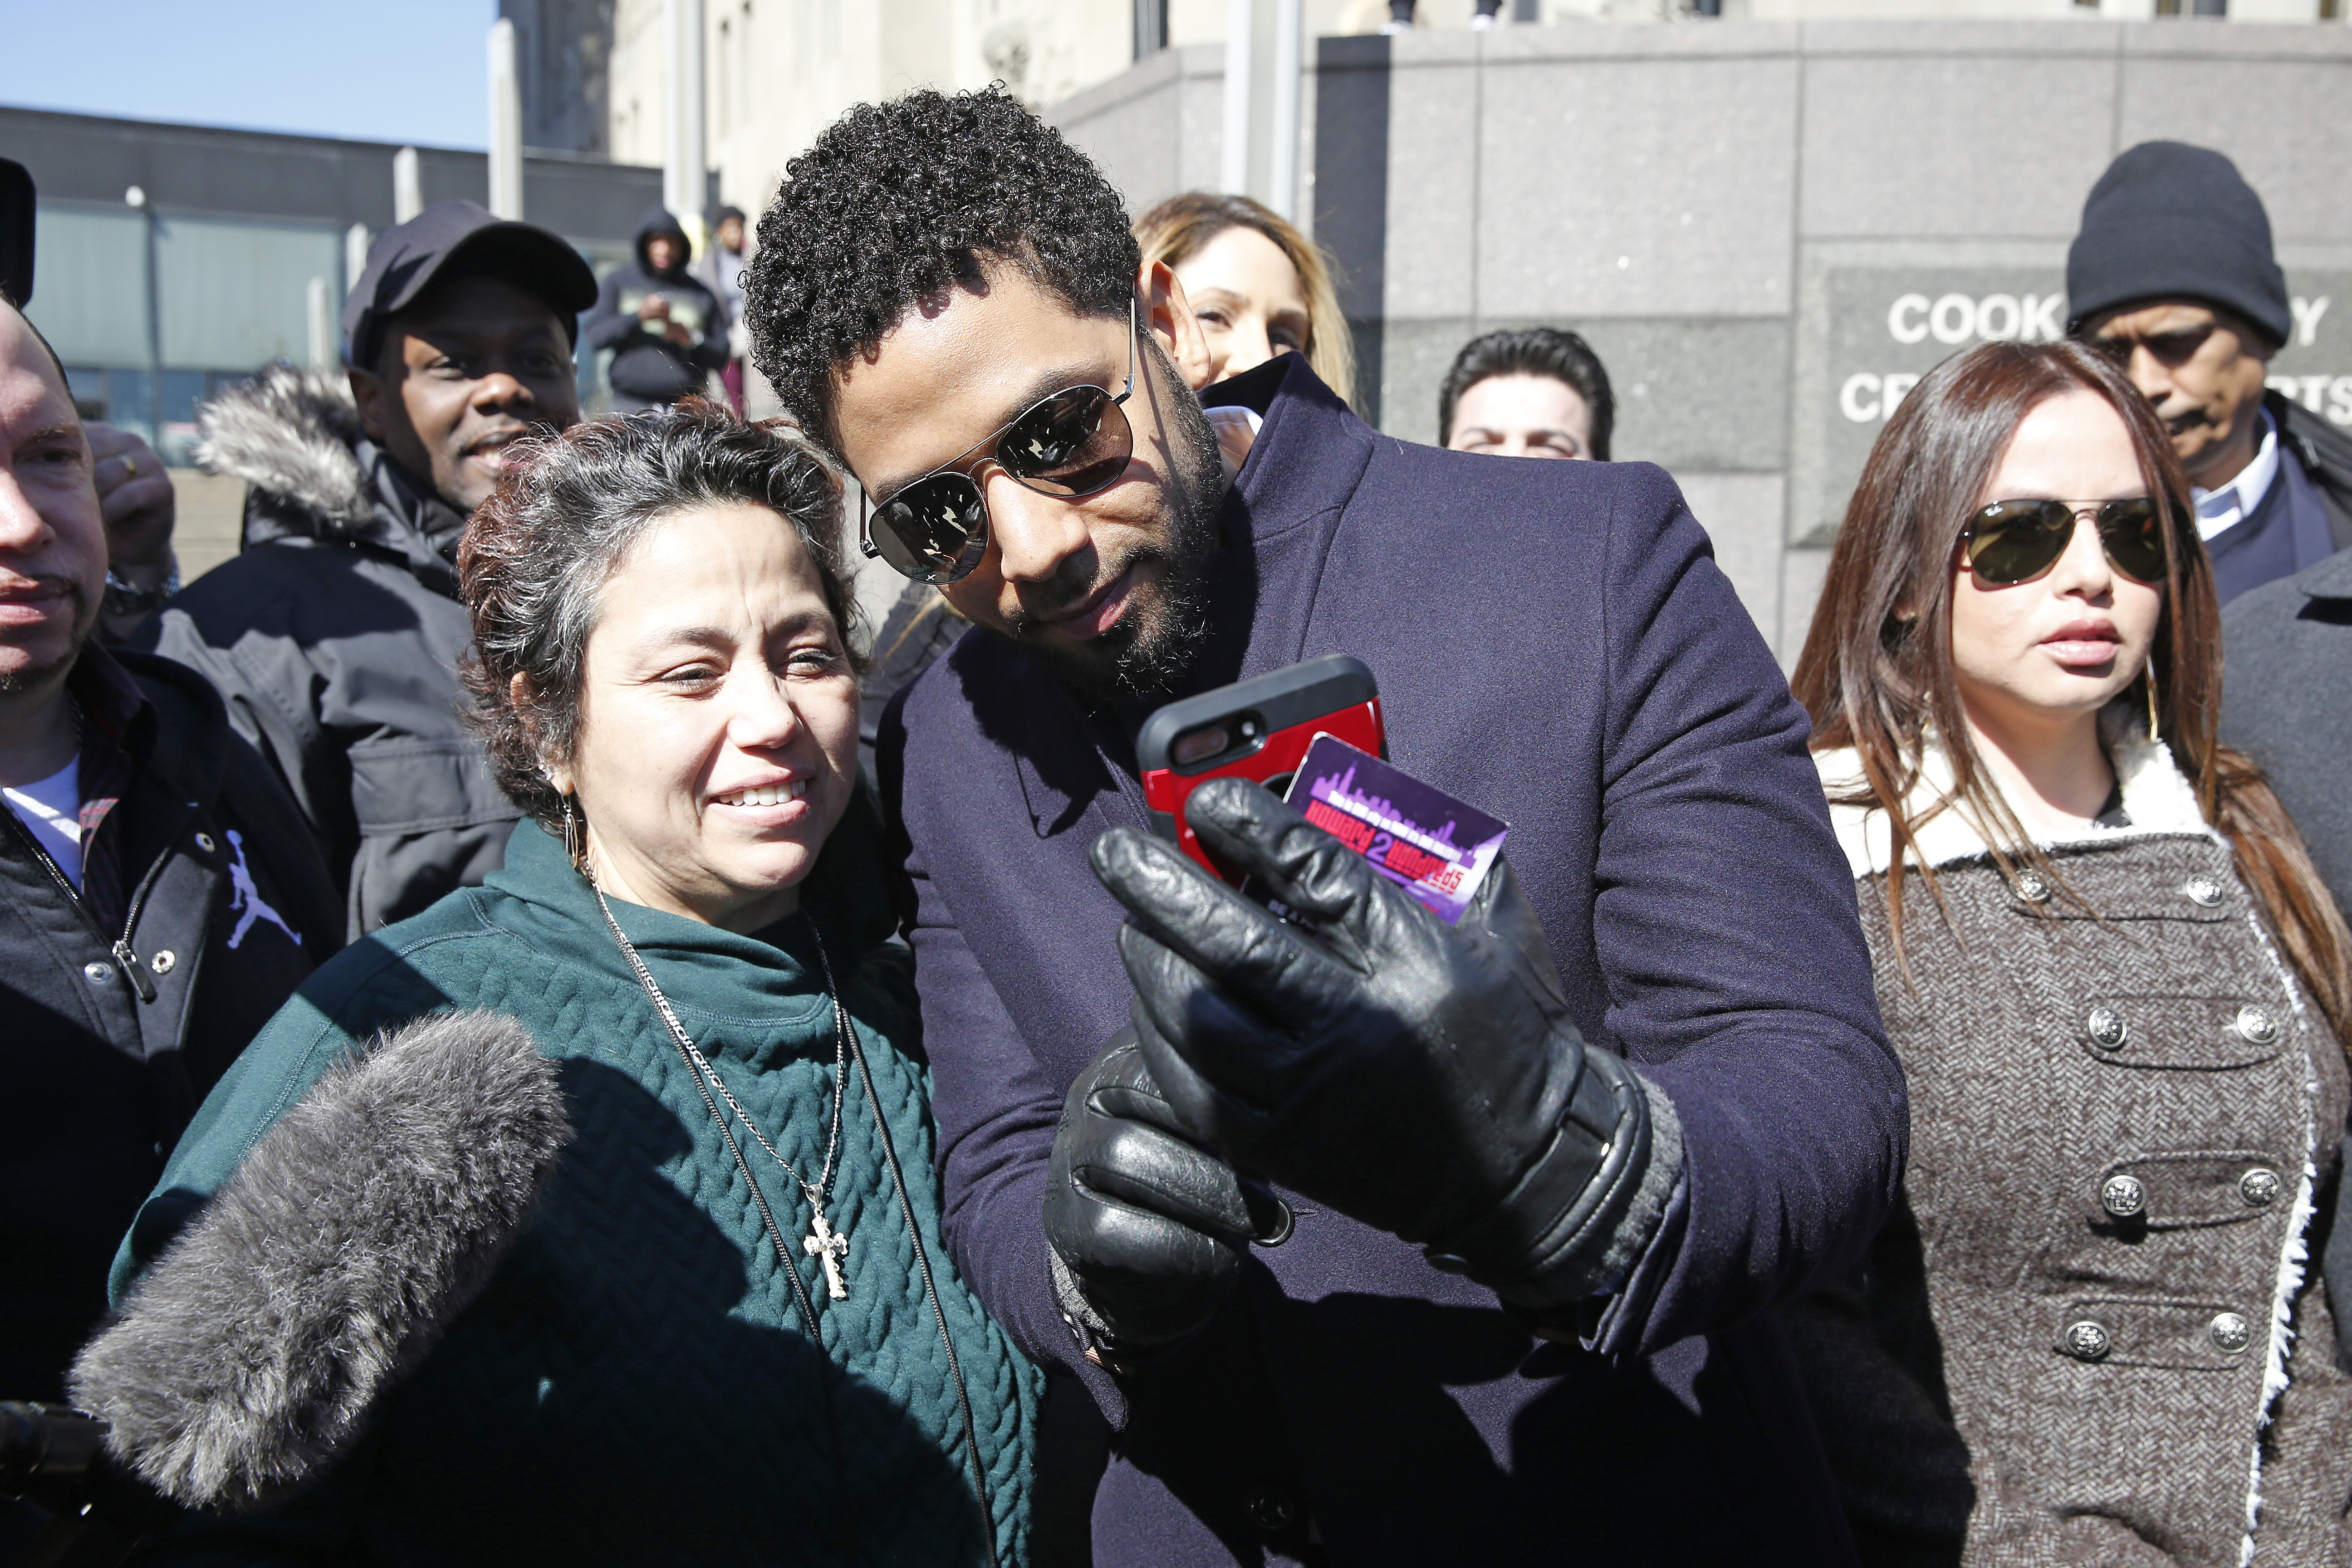 CHICAGO, ILLINOIS - MARCH 26: A fan takes a selfie with actor Jussie Smollett following his court appearance at Leighton Courthouse on March 26, 2019 in Chicago, Illinois. This morning in court it was announced that all charges were dropped against the actor. (Photo by Nuccio DiNuzzo/Getty Images)